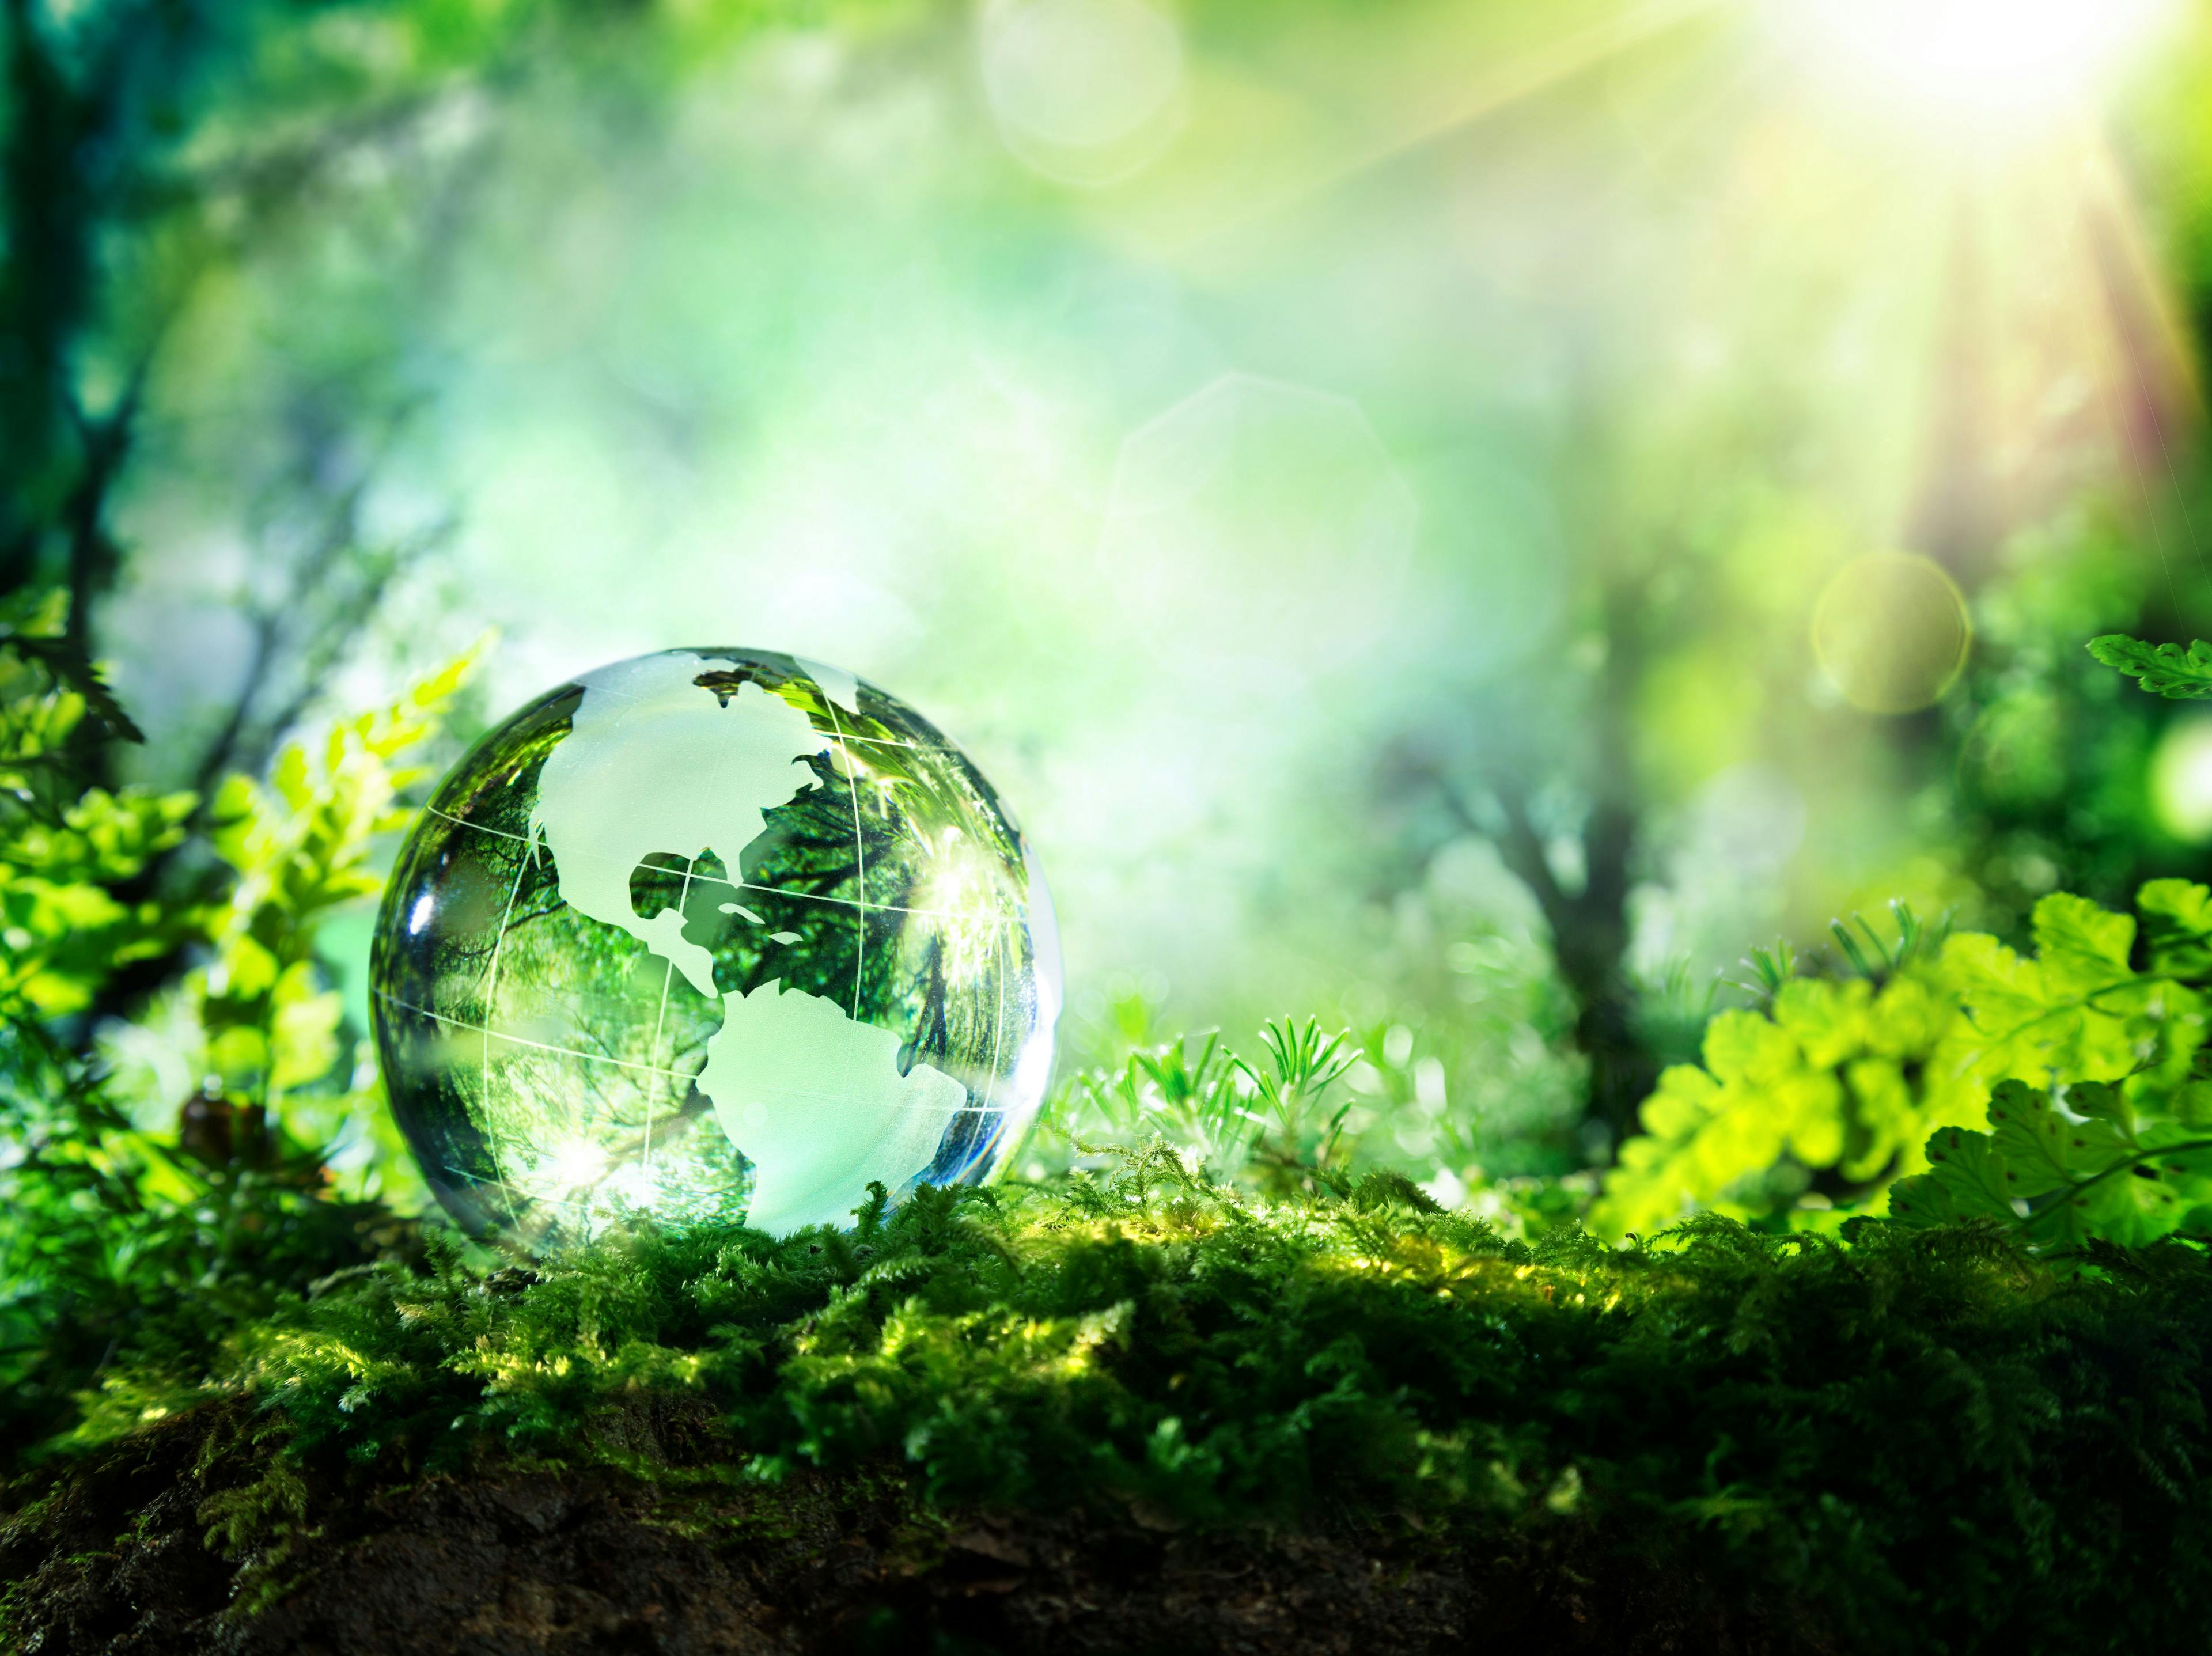 crystal globe on moss in a forest - environment concept | Image Credit: © Romolo Tavani - stock.adobe.com.